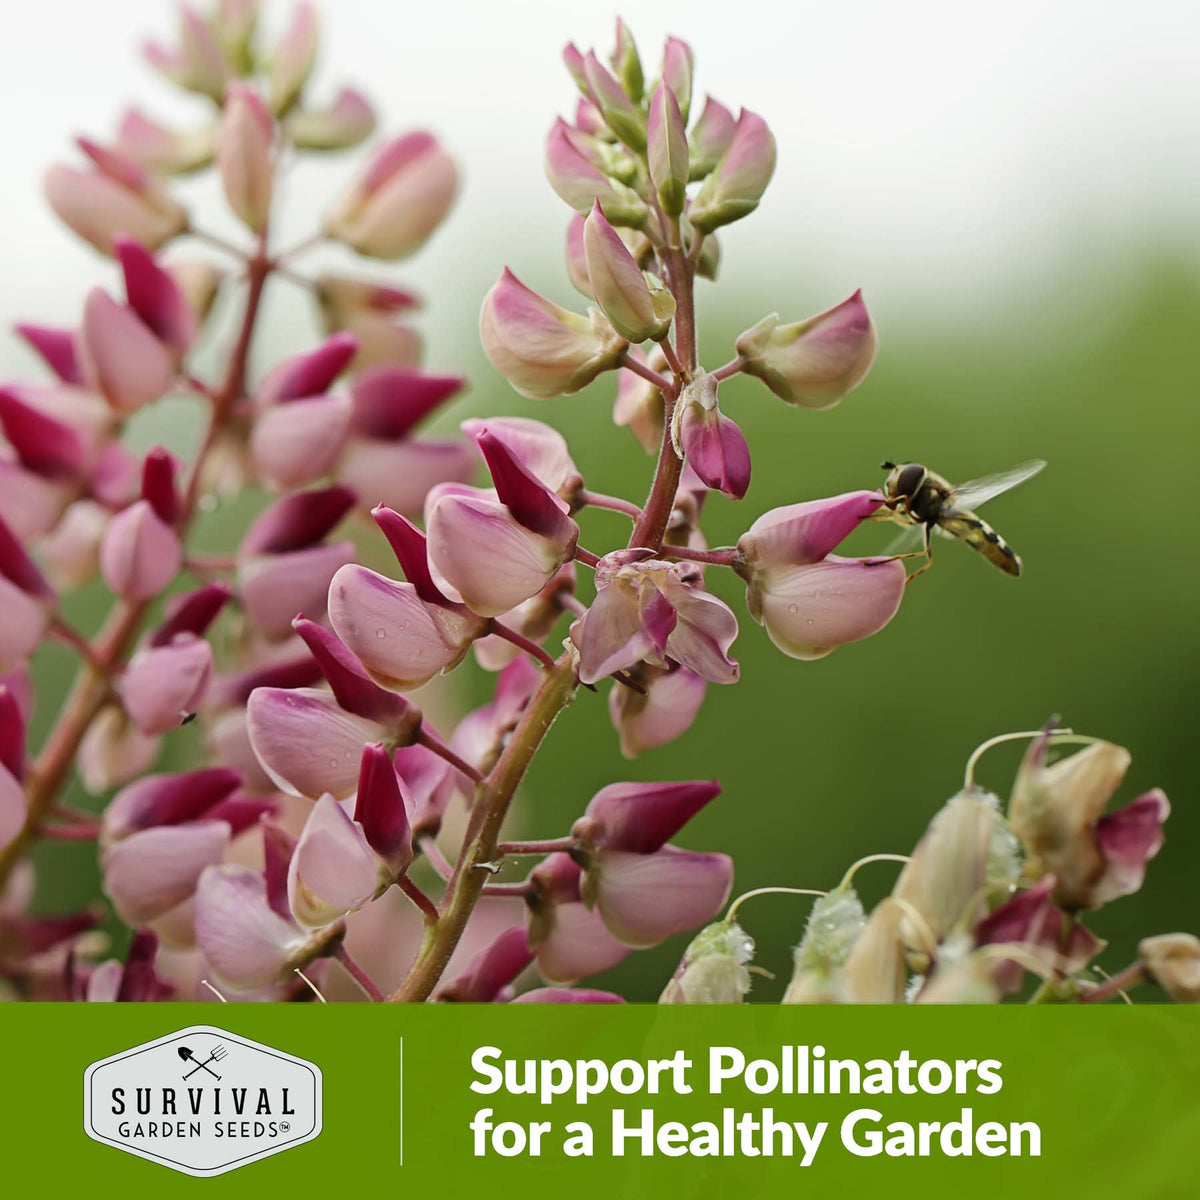 Russel Lupine helps support pollinators for a healthy garden